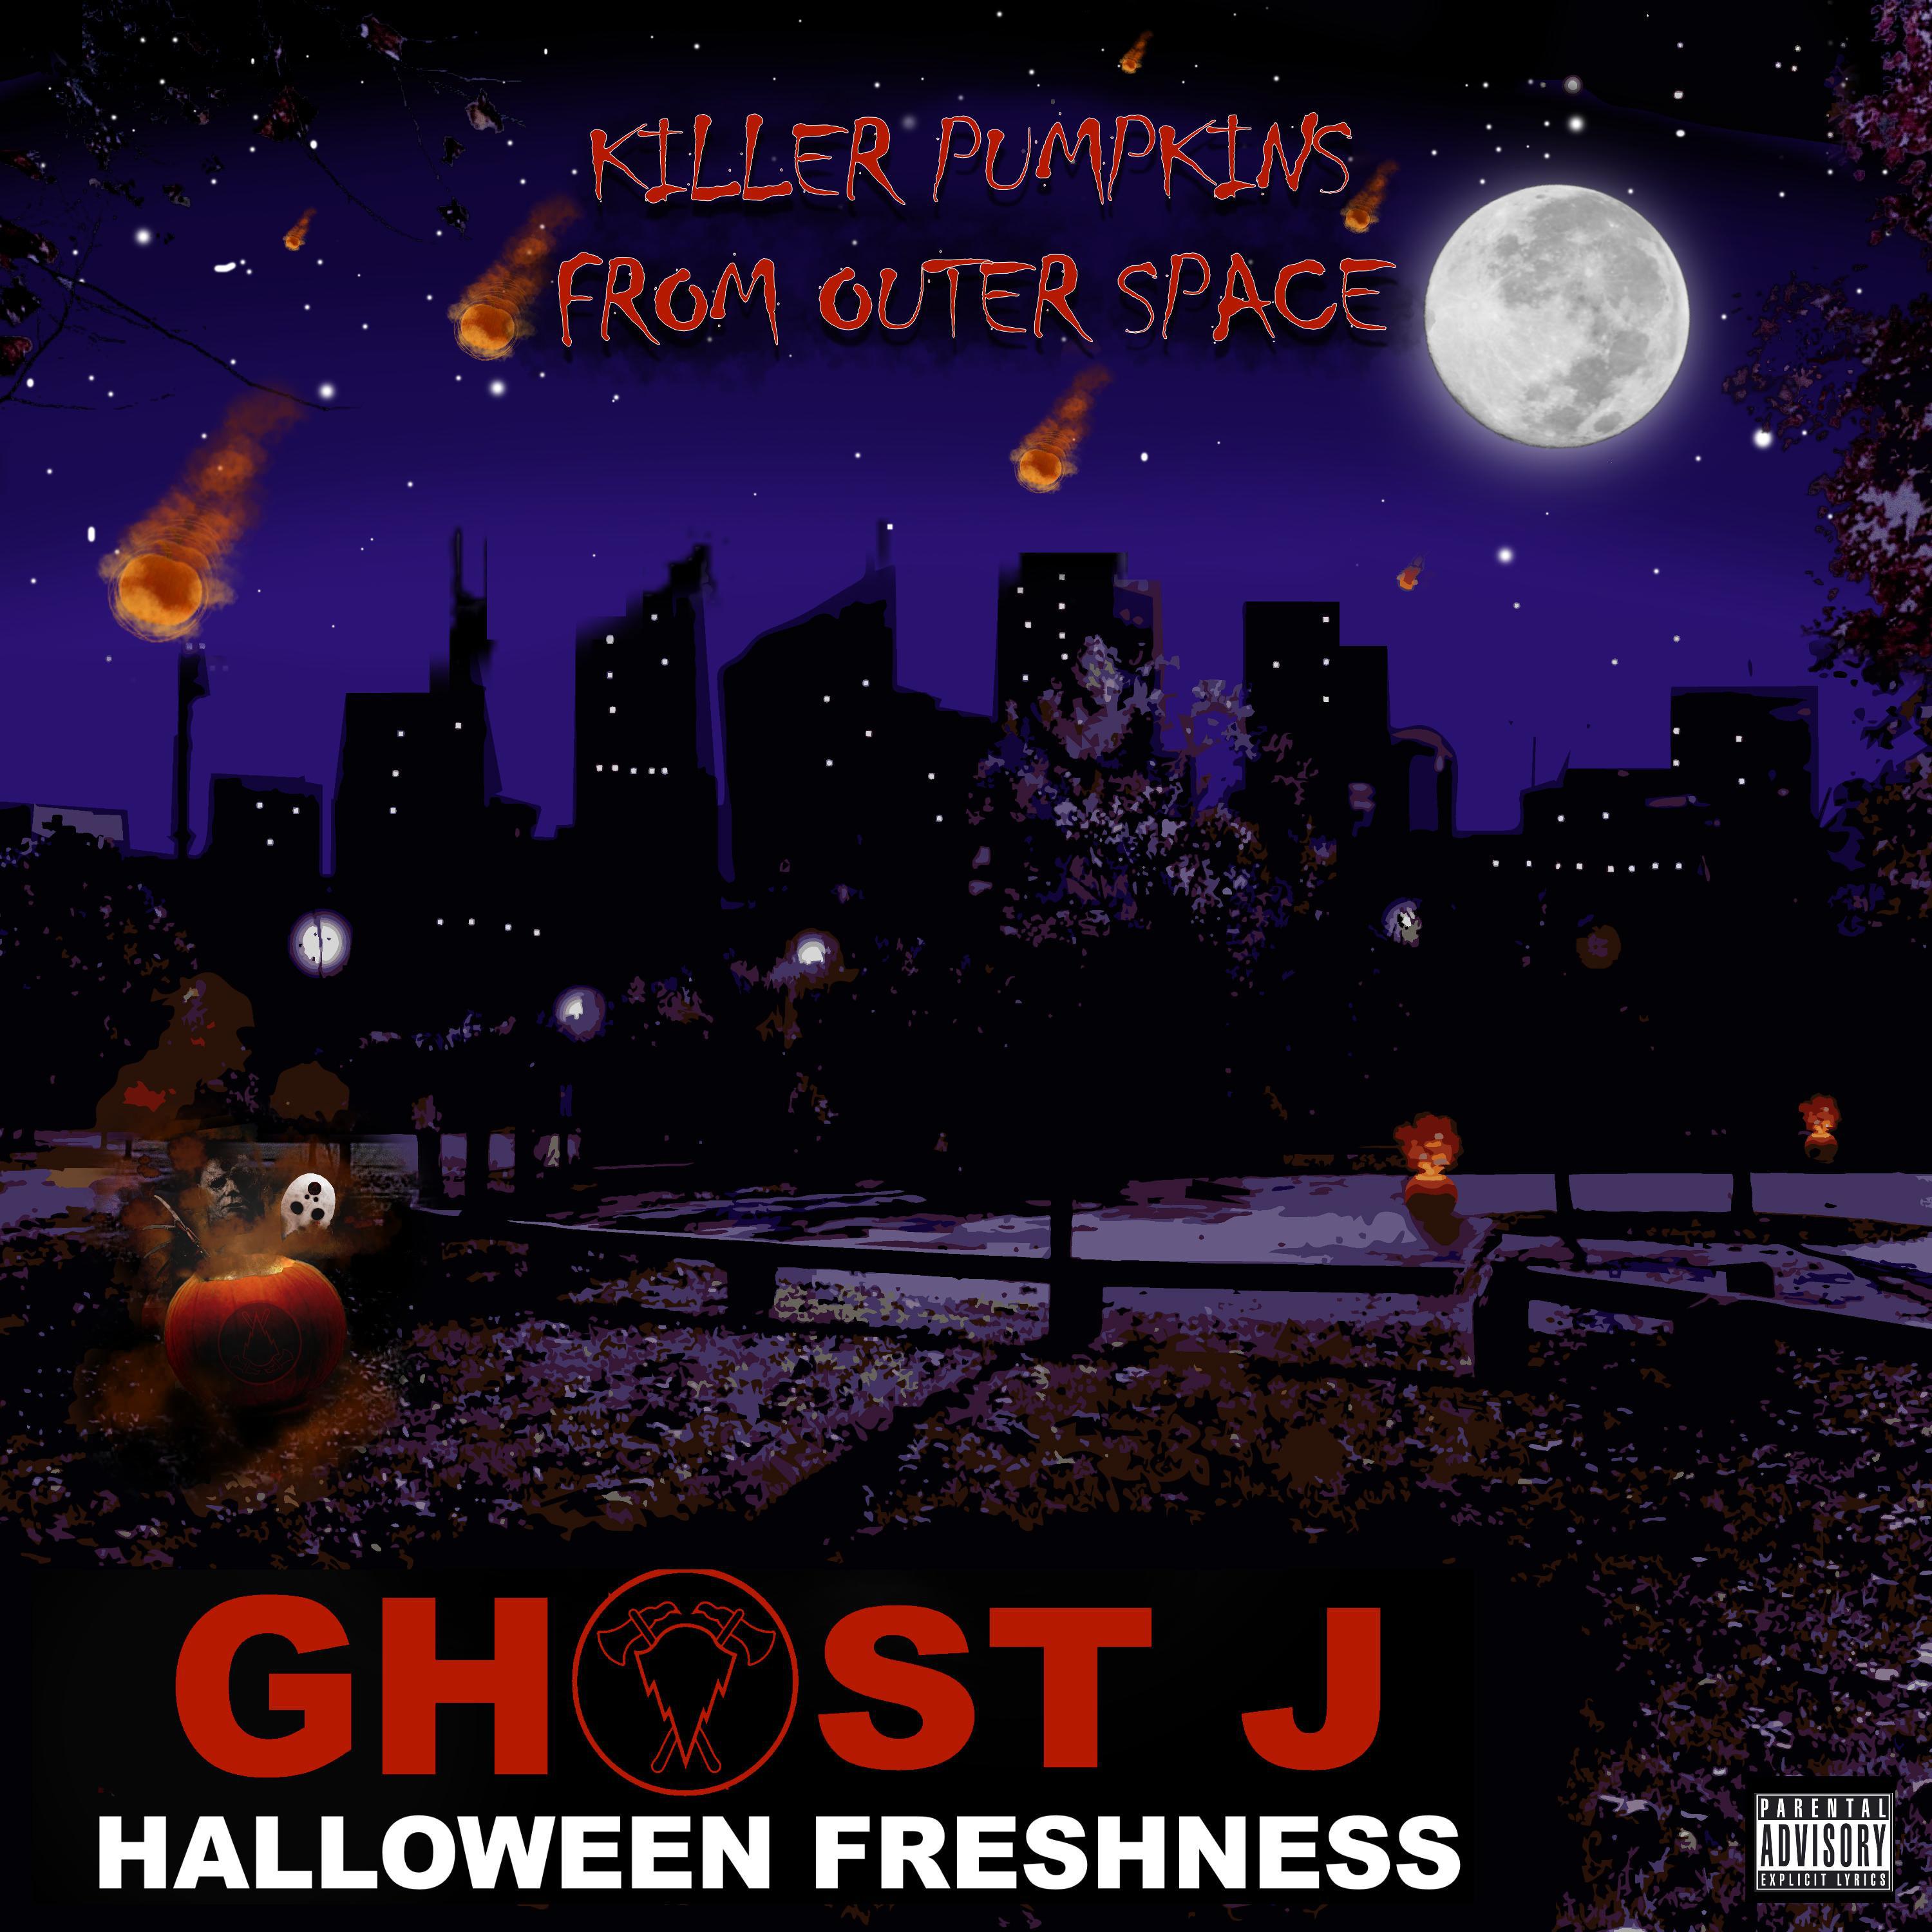 Ghost J - Killer Pumpkins from Outer Space